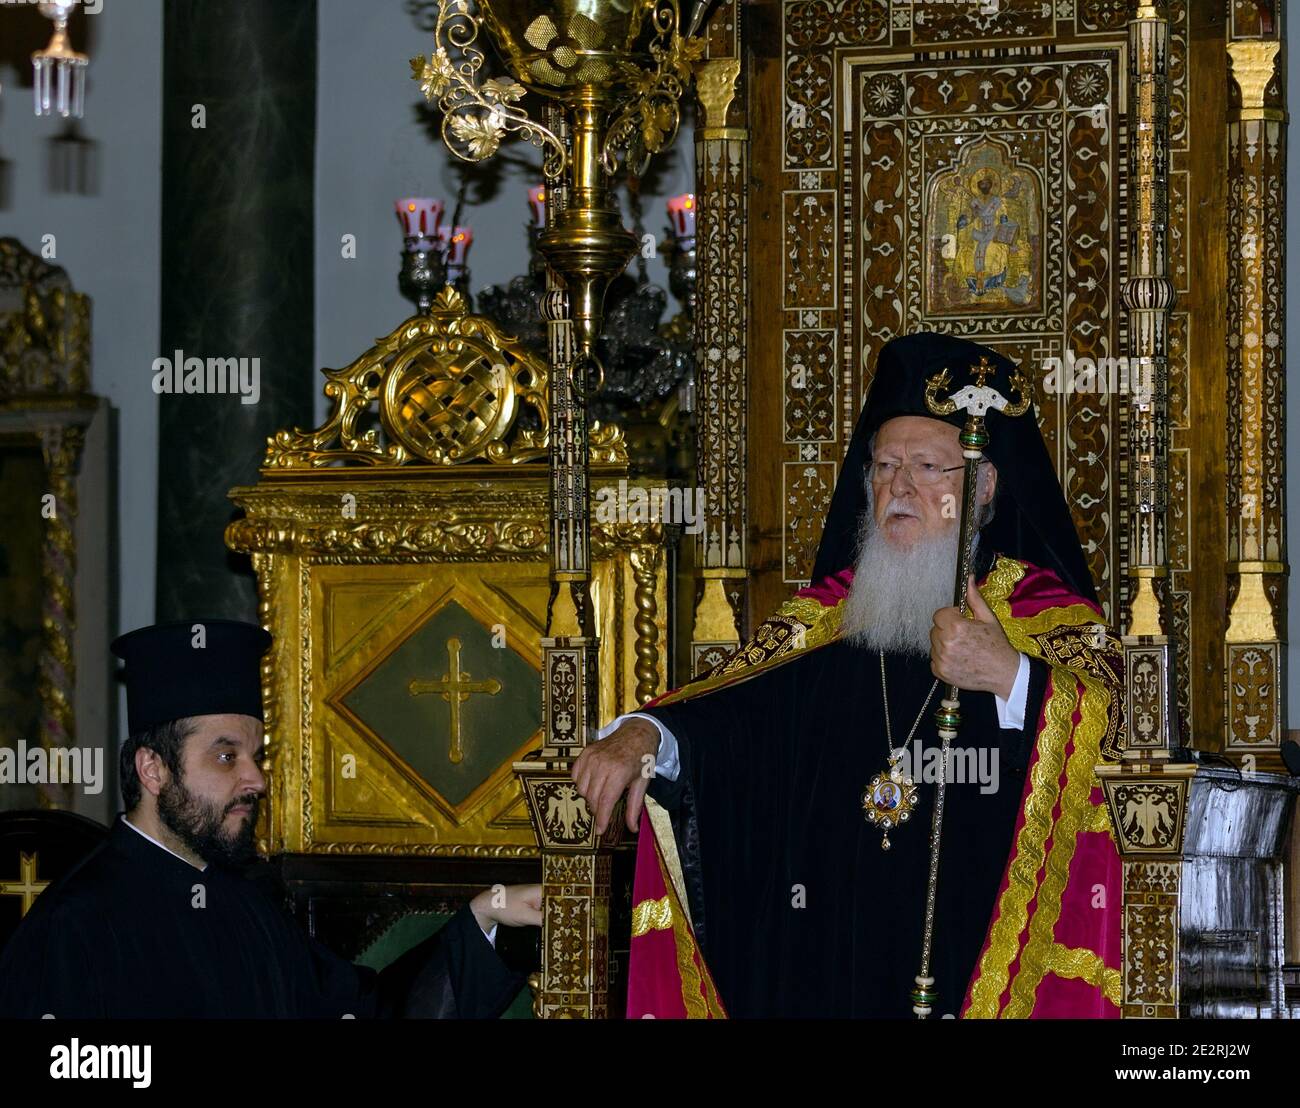 ISTANBUL, TURKEY - DECEMBER 30, 2012: Patriarch Bartholomew I, Ecumenical Patriarch of Constantinople, attends the liturgy in the Patriarchal Church. Stock Photo